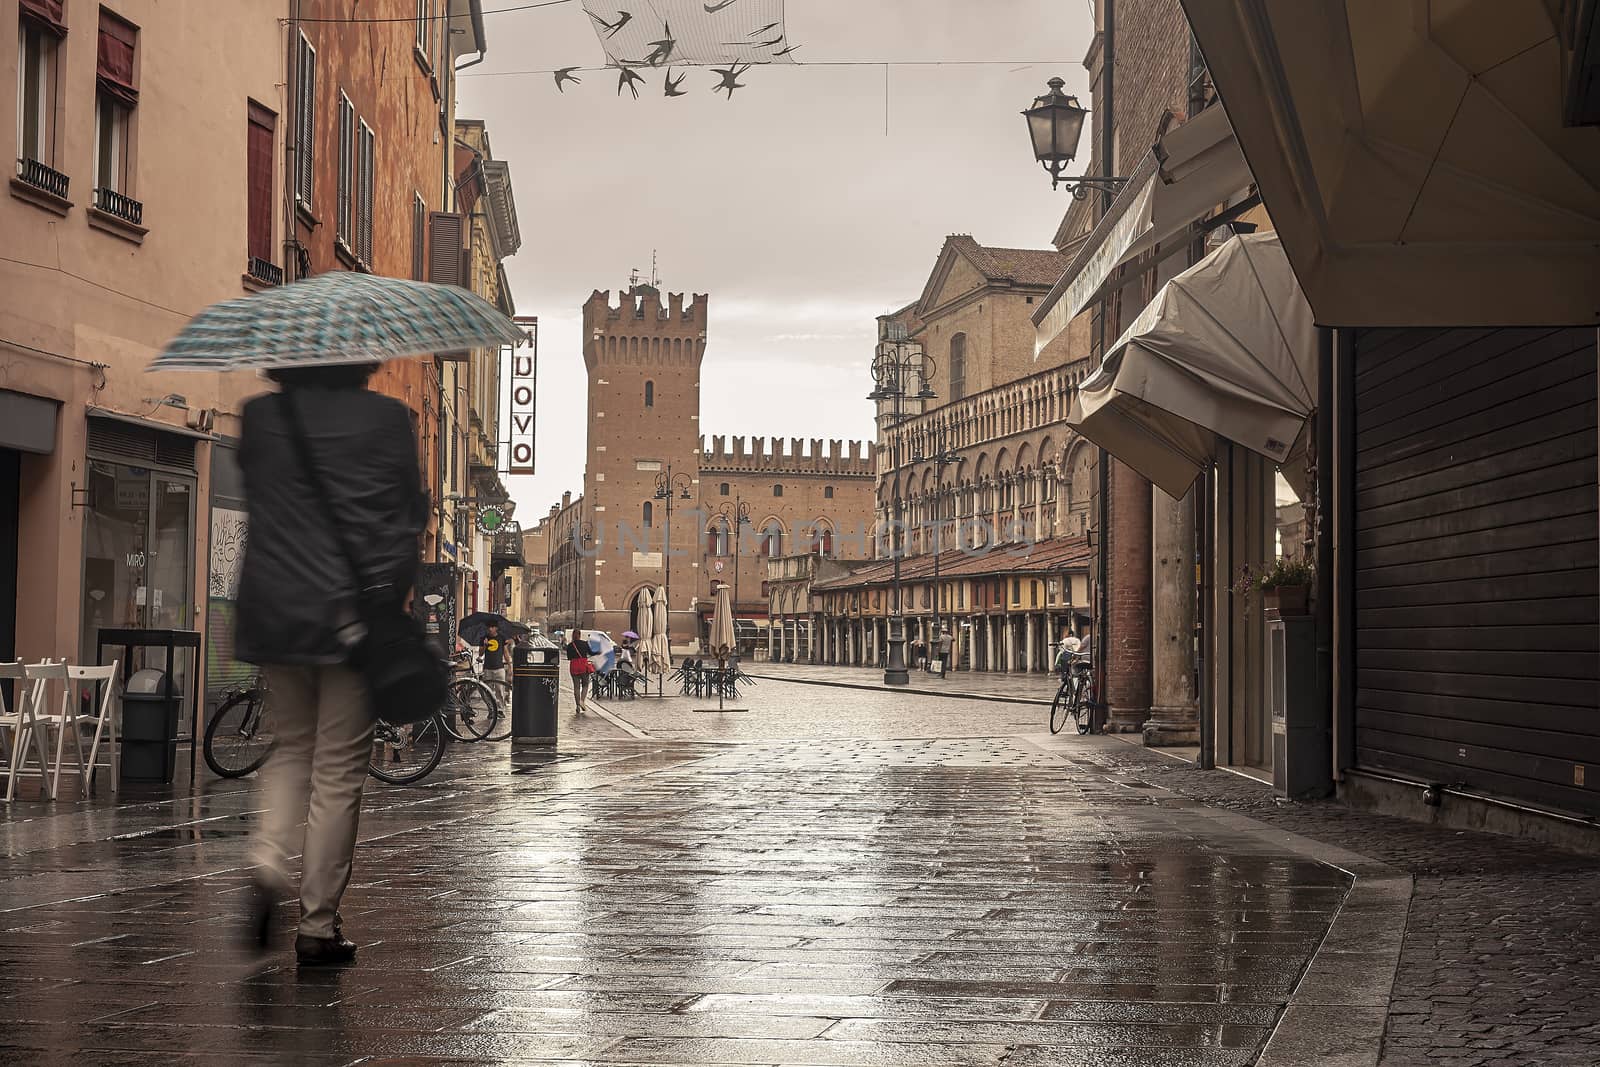 Evocative view of the street that leads to Piazza Trento Trieste in Ferrara 3 by pippocarlot